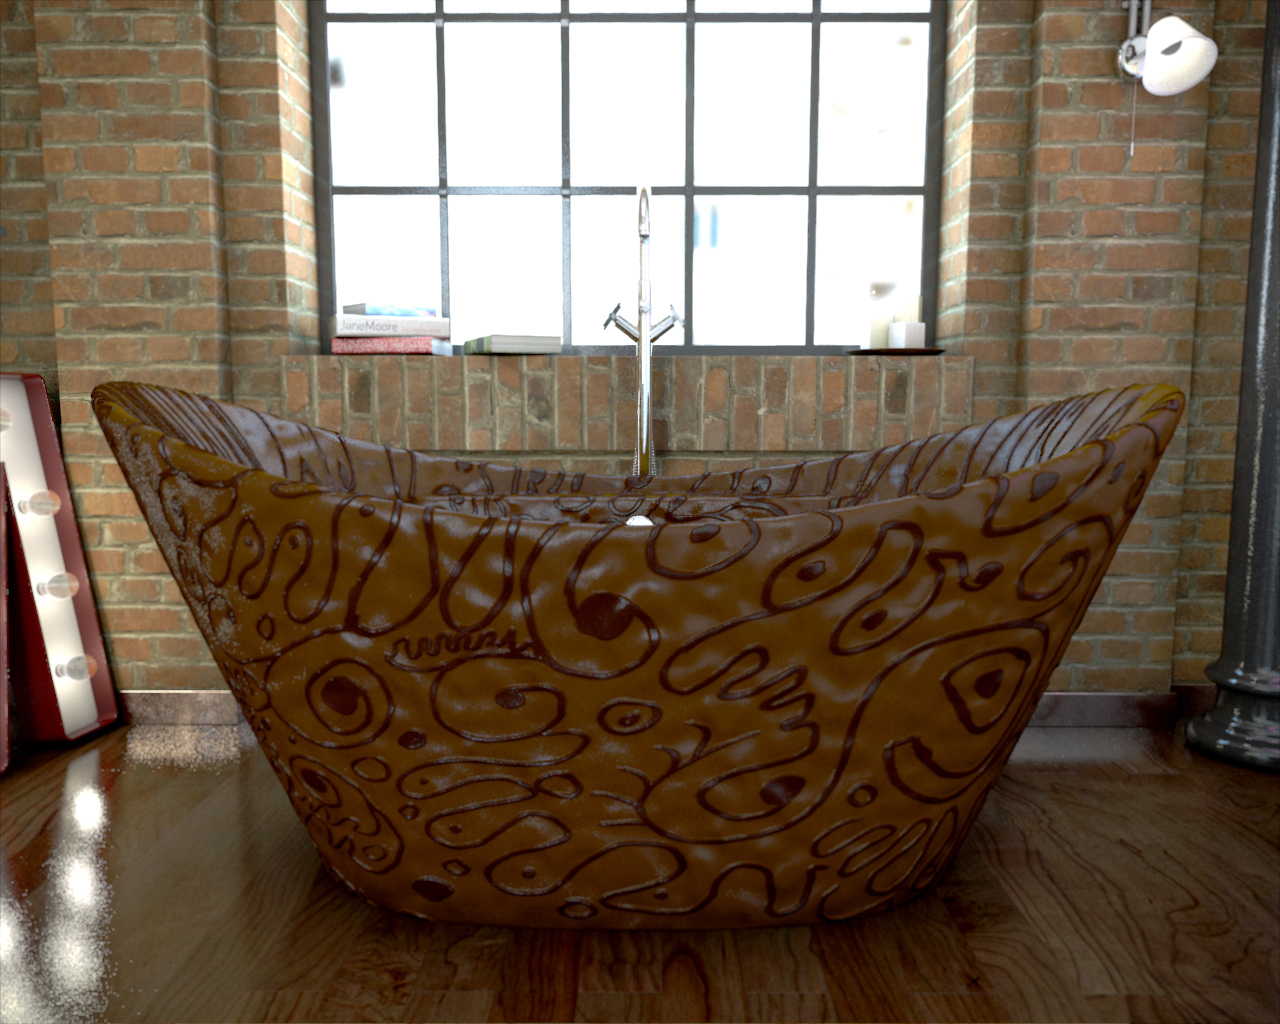 PHOTO: This chocolate bathtub can be yours, but it will set you back over $80,000 and 8 million calories.